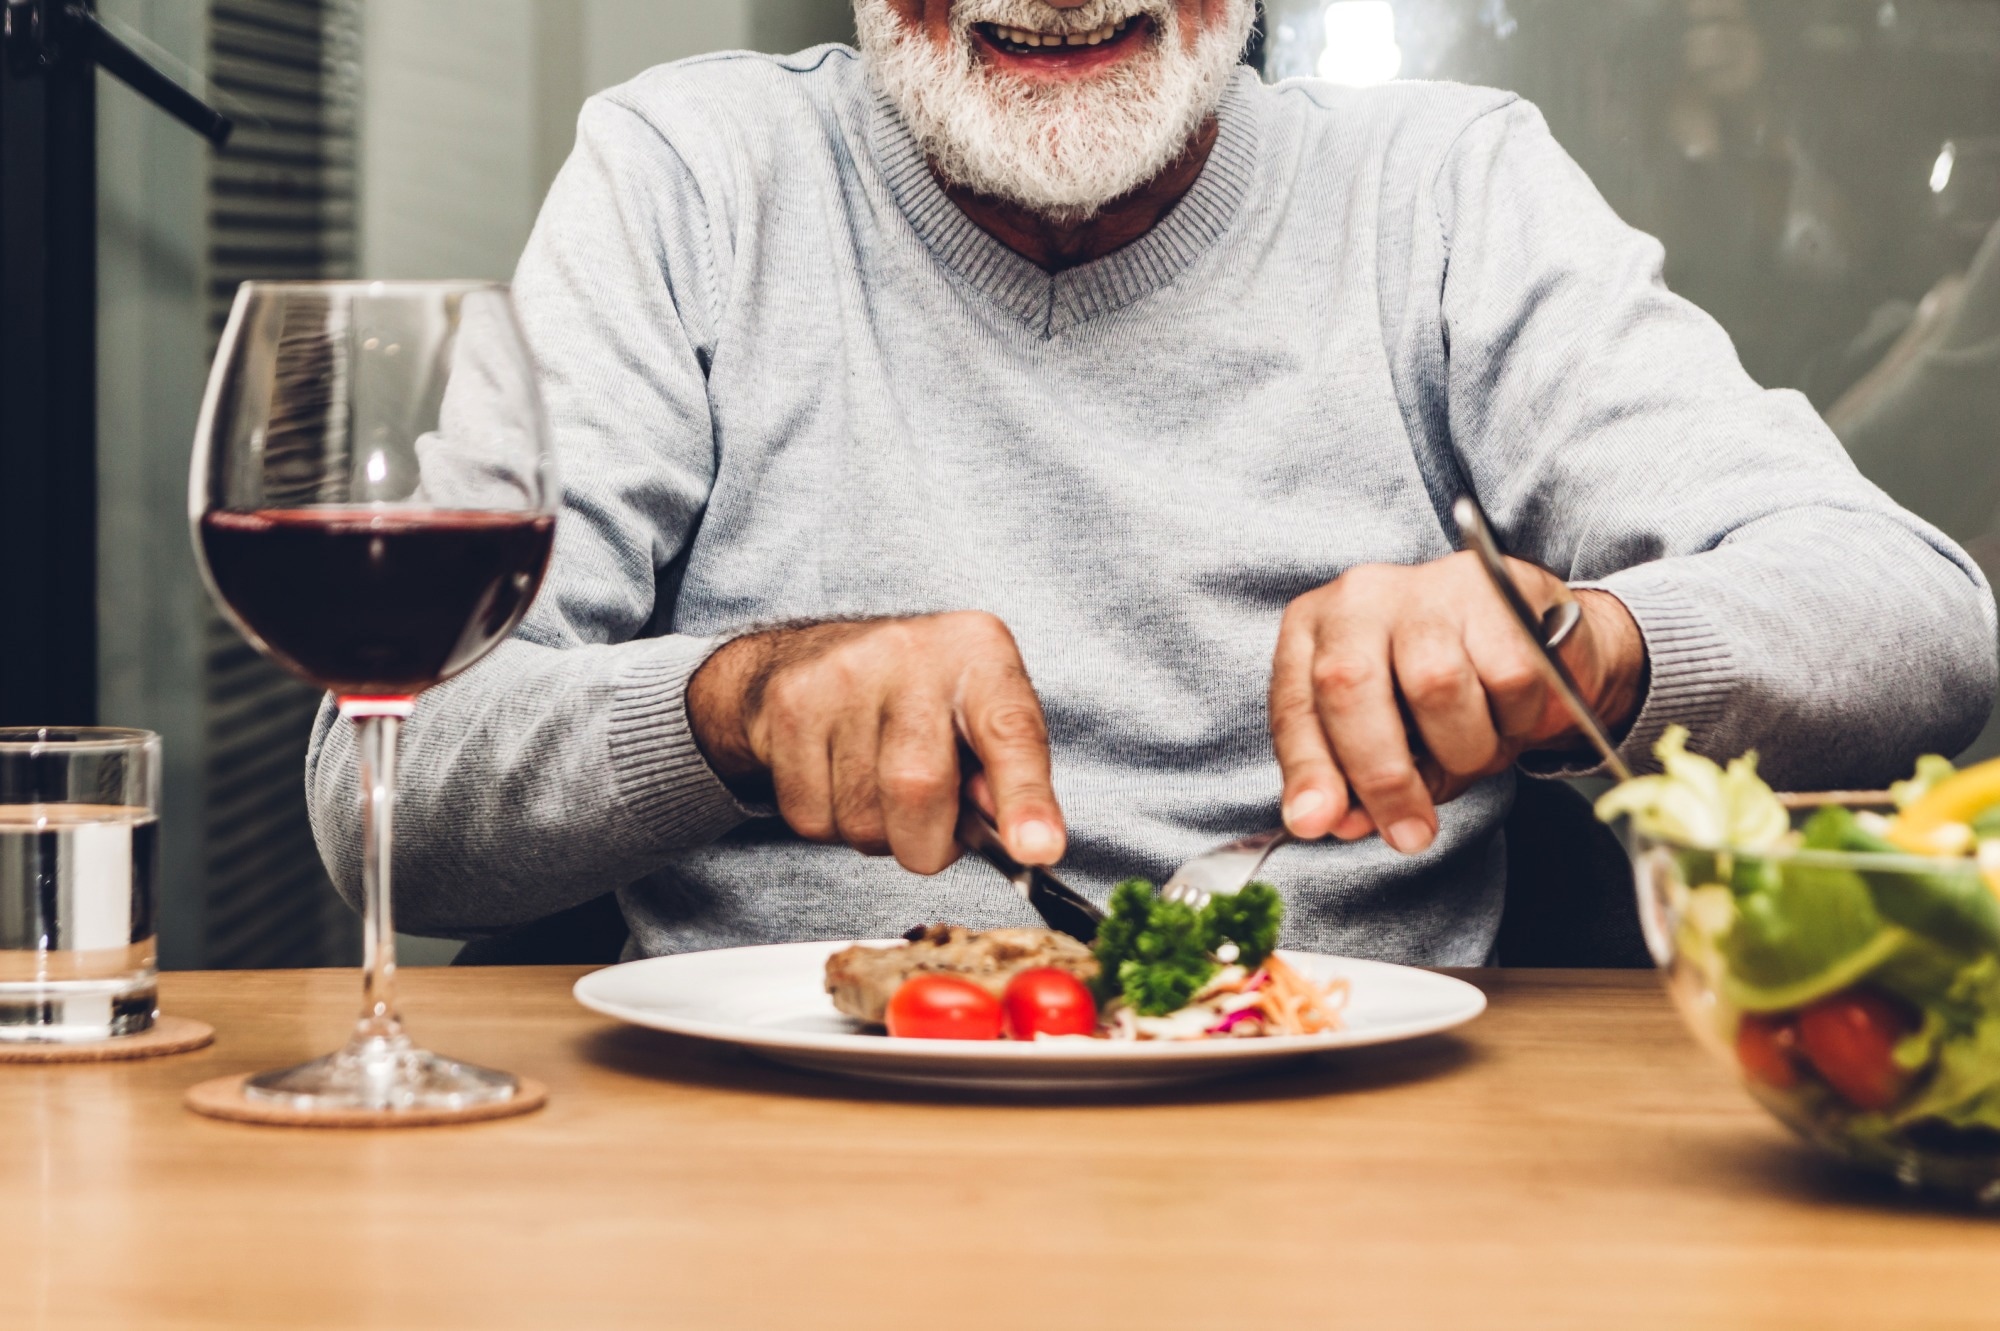 Study: Association of Alternative Dietary Patterns with Osteoporosis and Fracture Risk in Older People: A Scoping Review. Image Credit: Art_Photo / Shutterstock.com